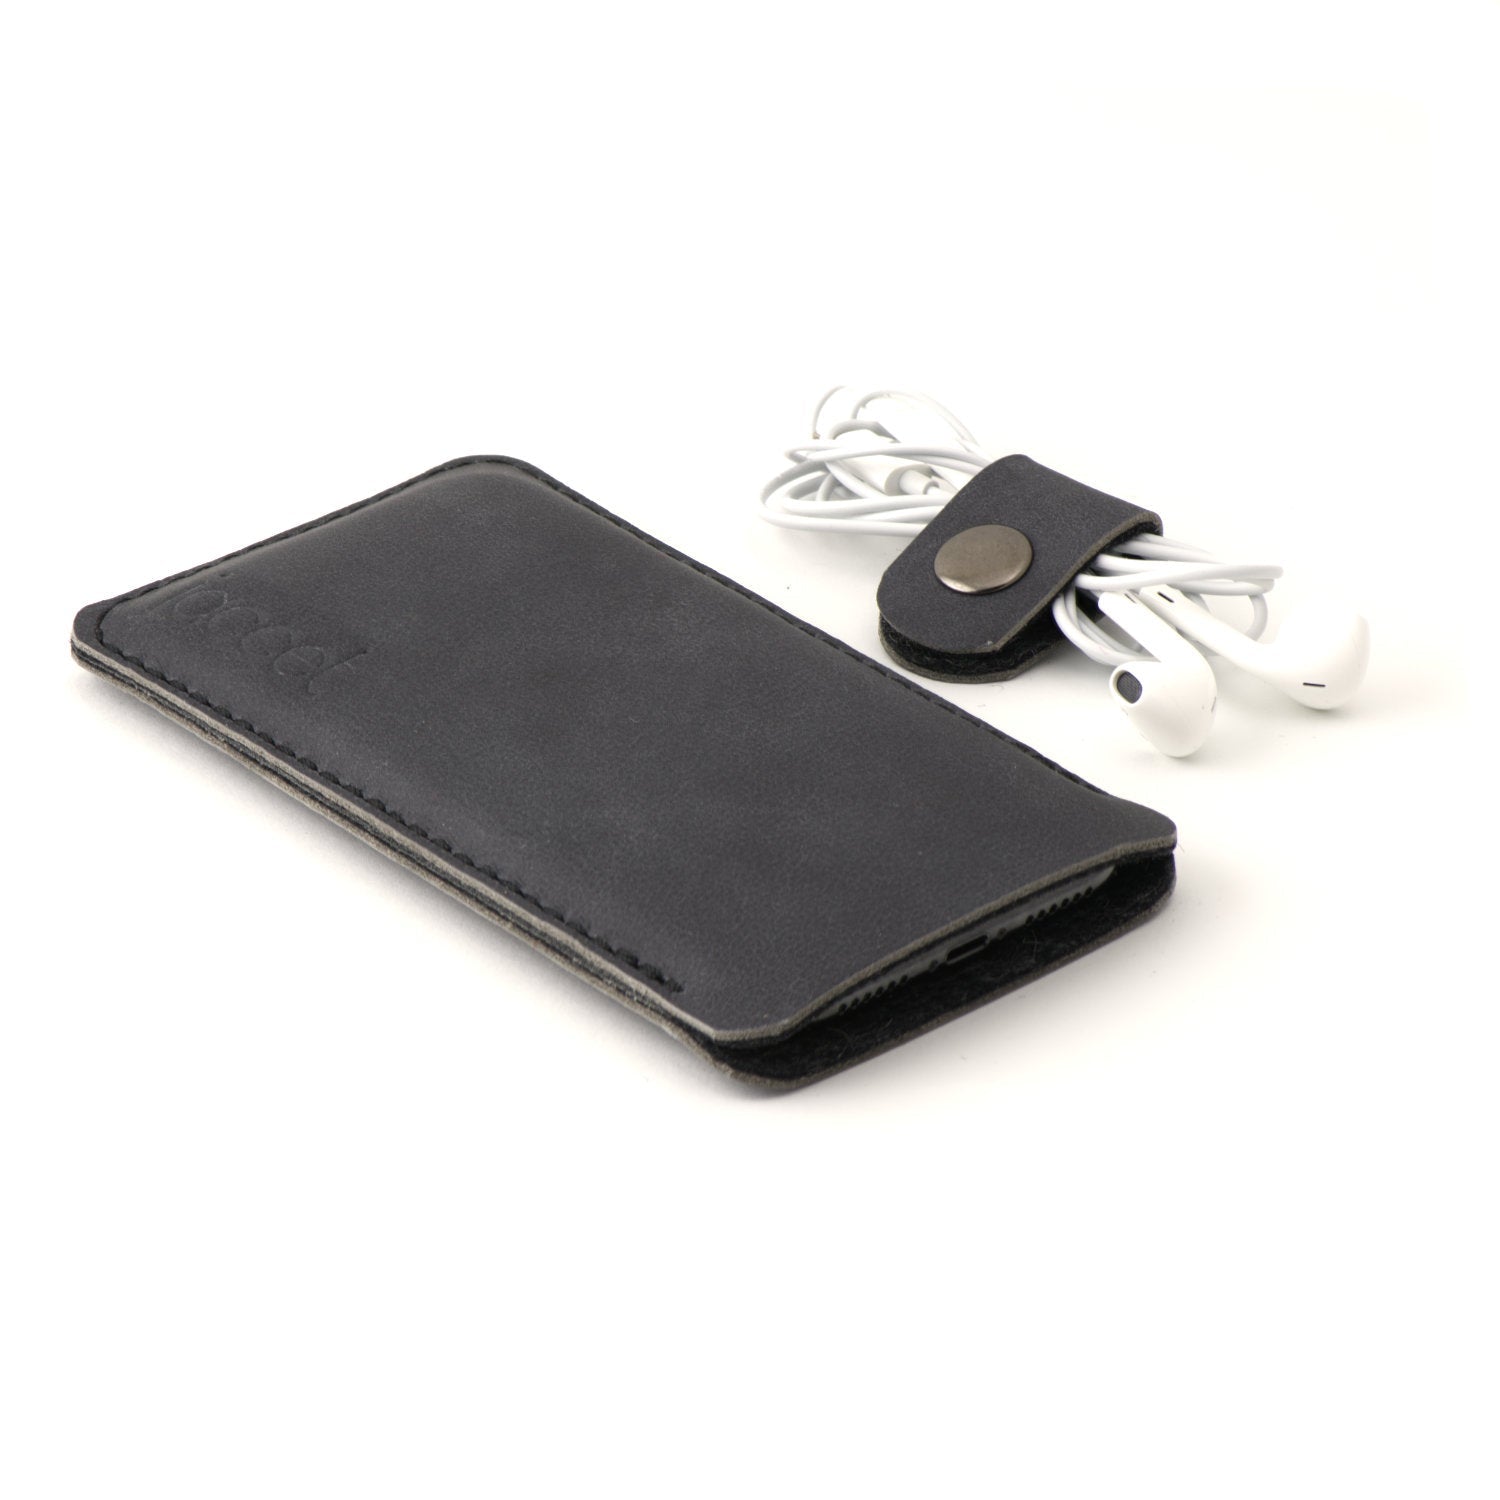 JACCET leather OnePlus sleeve - anthracite/black leather with black wool felt. 100% Handmade